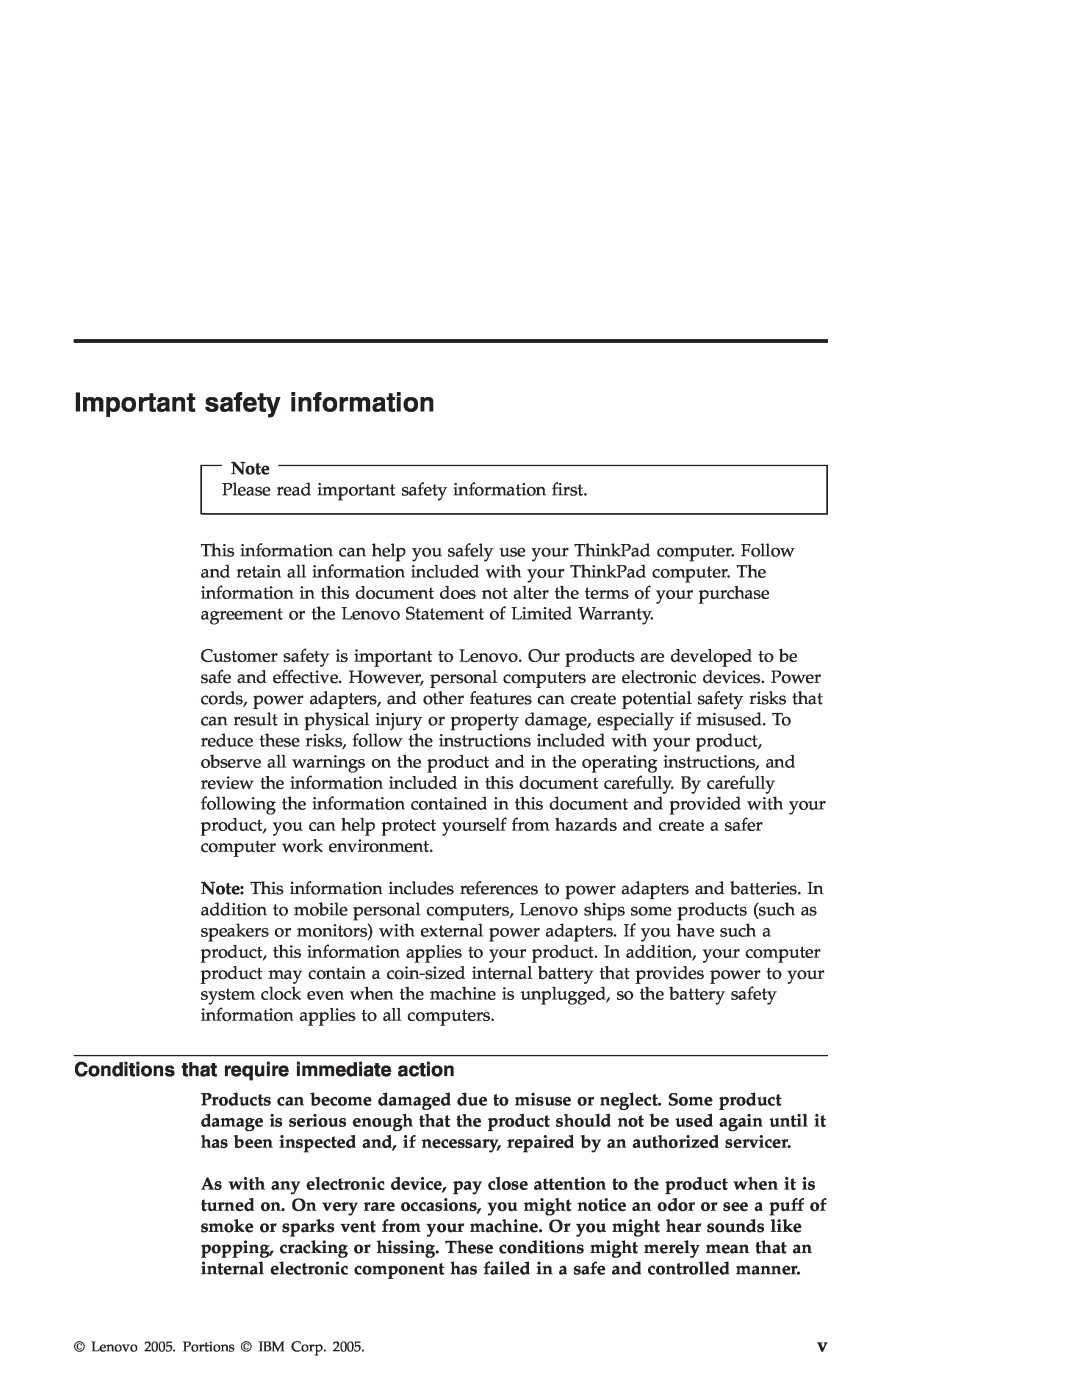 Lenovo R50 manual Important safety information, Conditions that require immediate action 